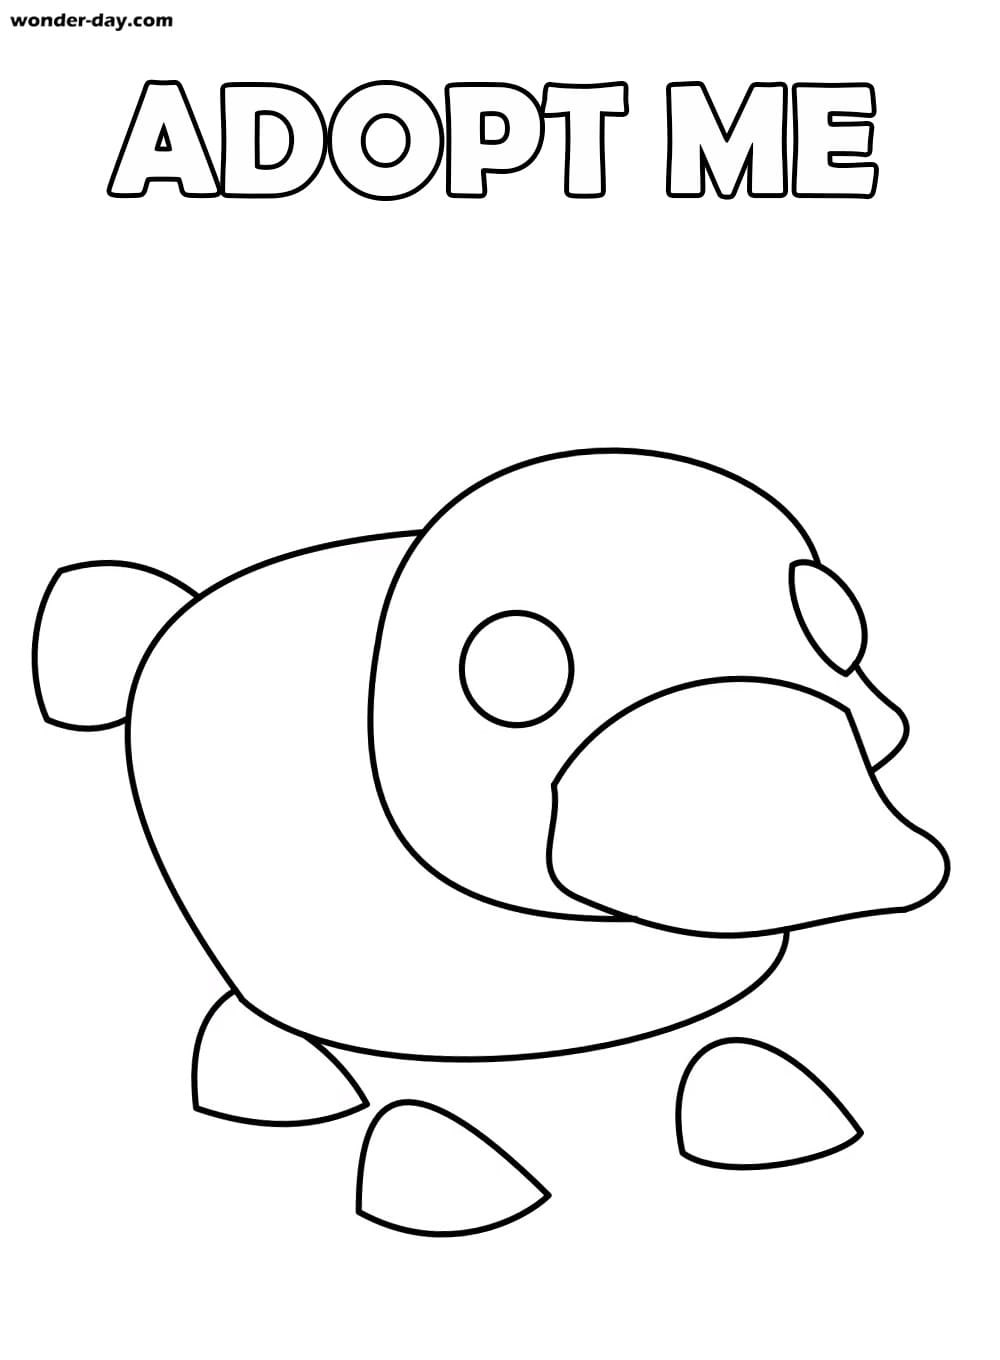 Adopt Me Coloring Pages Wonder Day Com - frost dragon roblox adopt me coloring pages printable